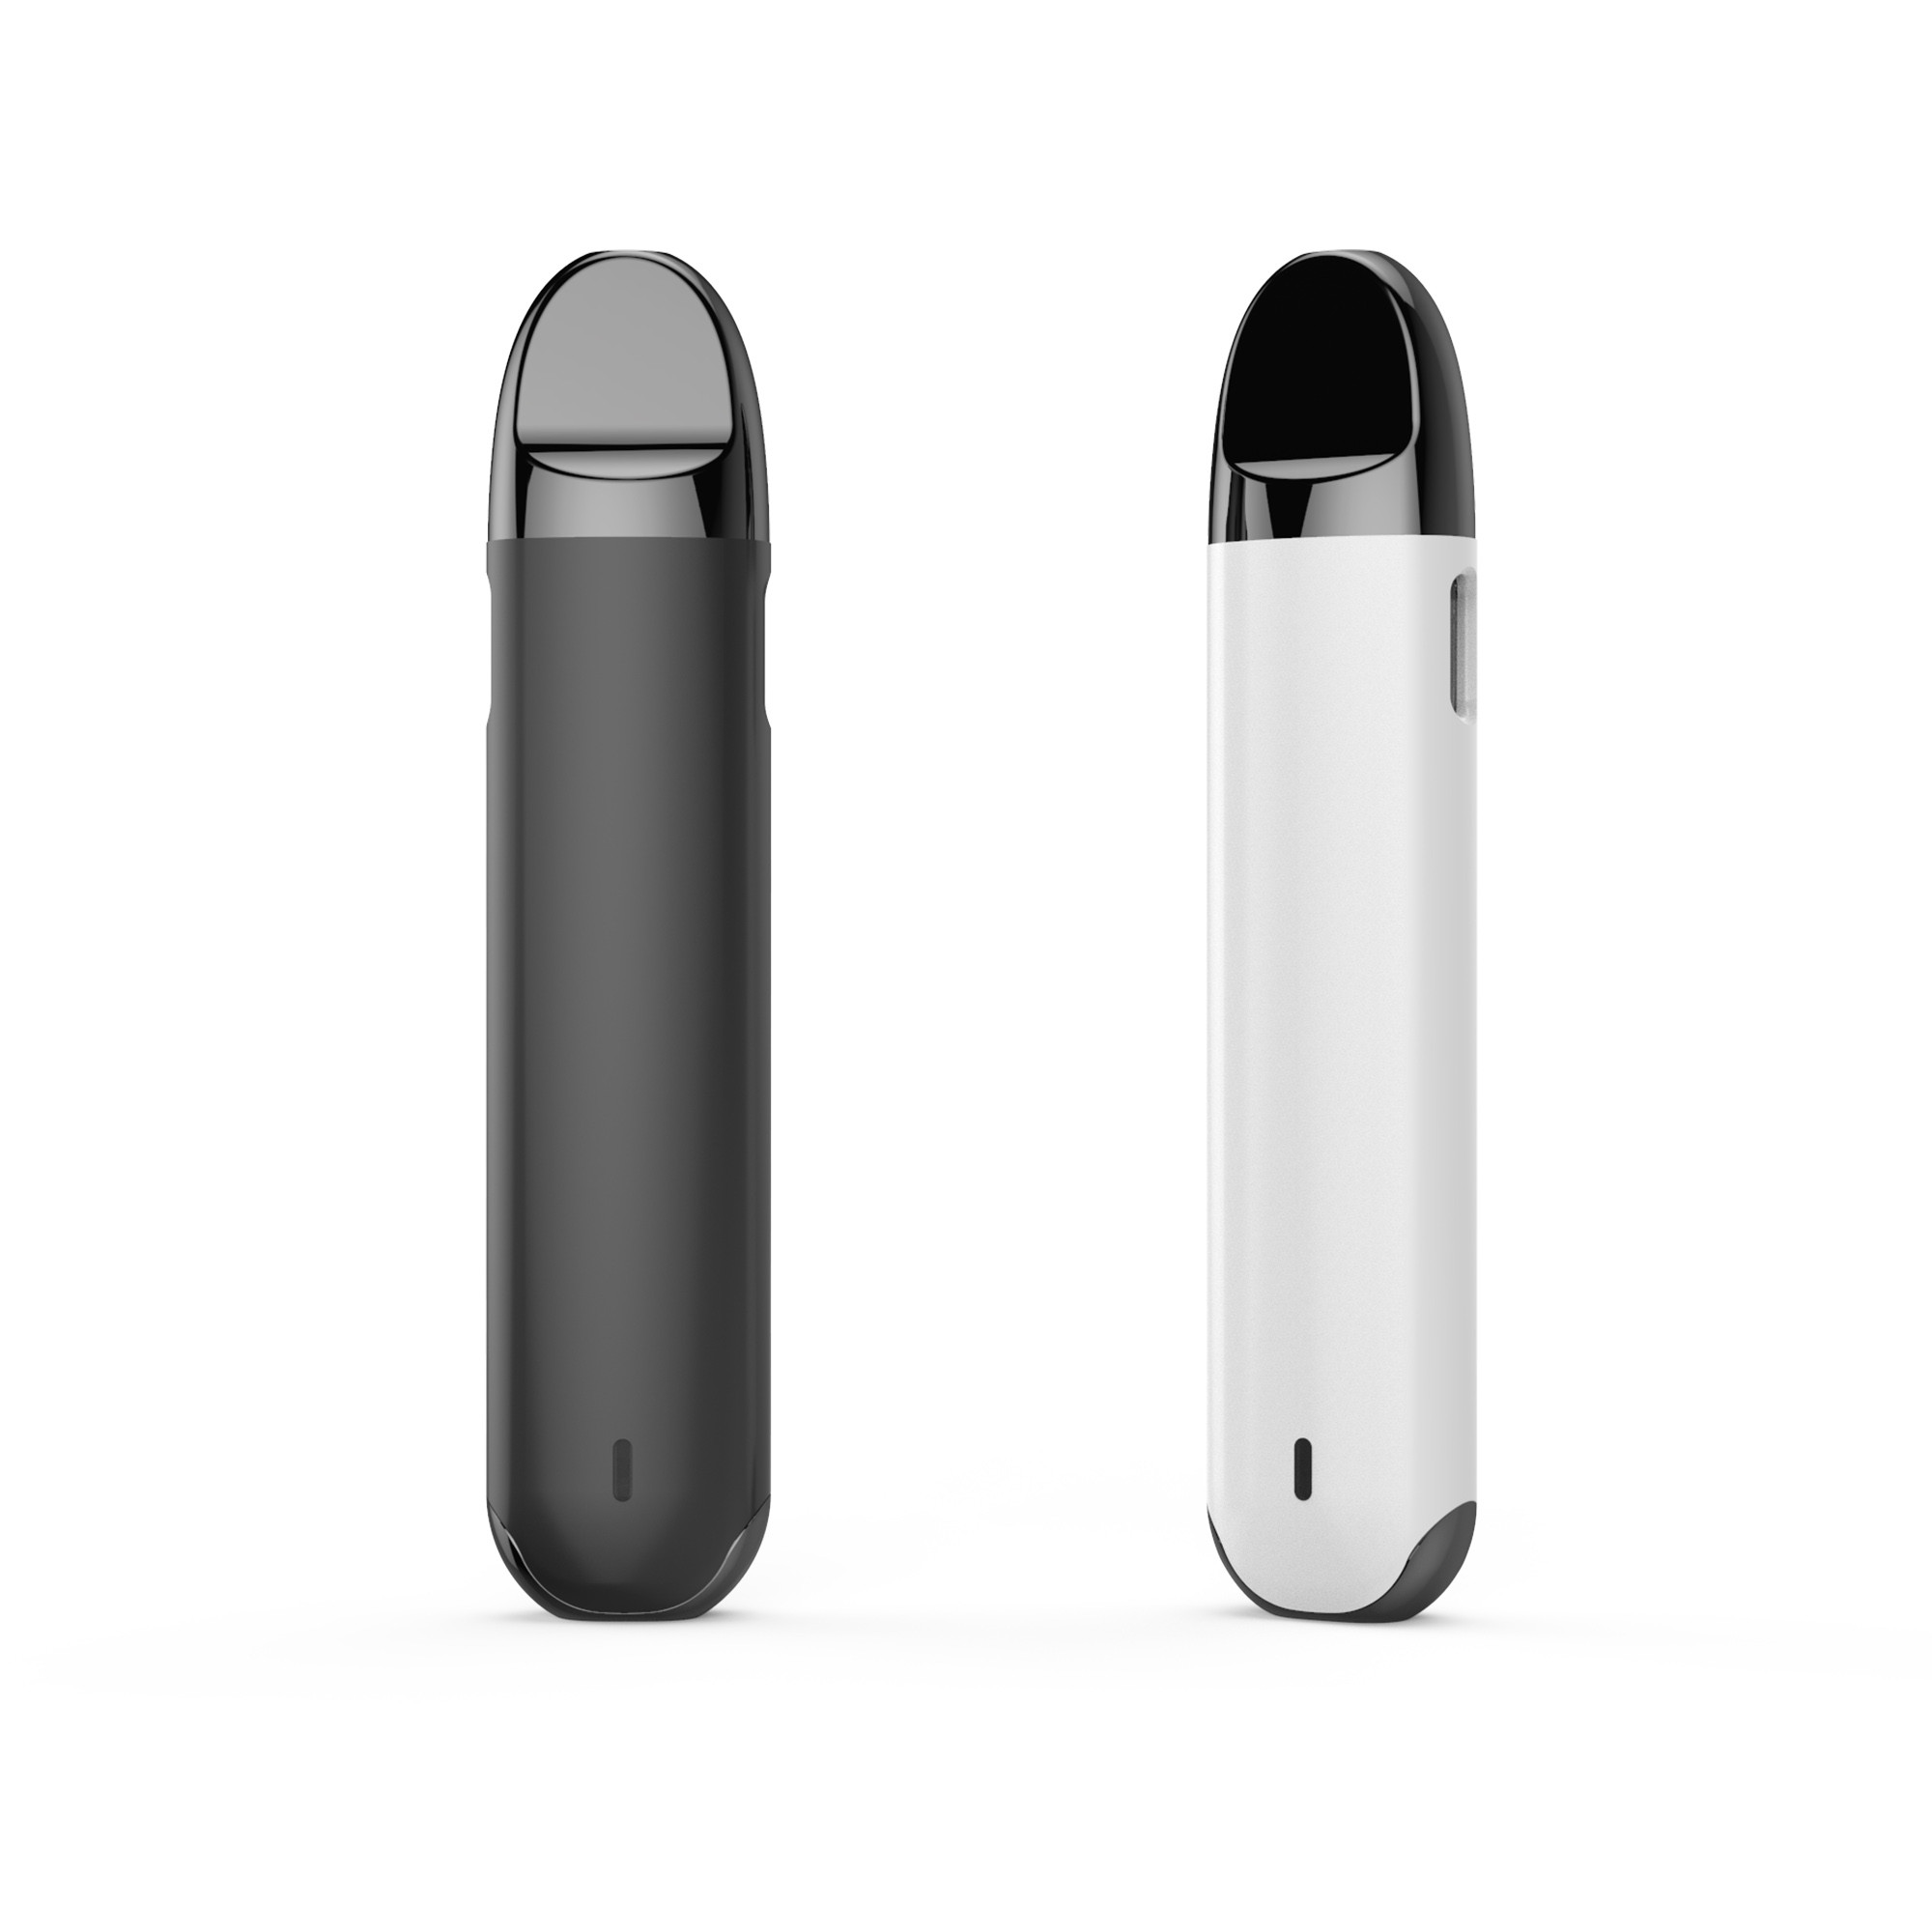 lightweight disposable vape-the vape suit for traveling-rechargeable-vape